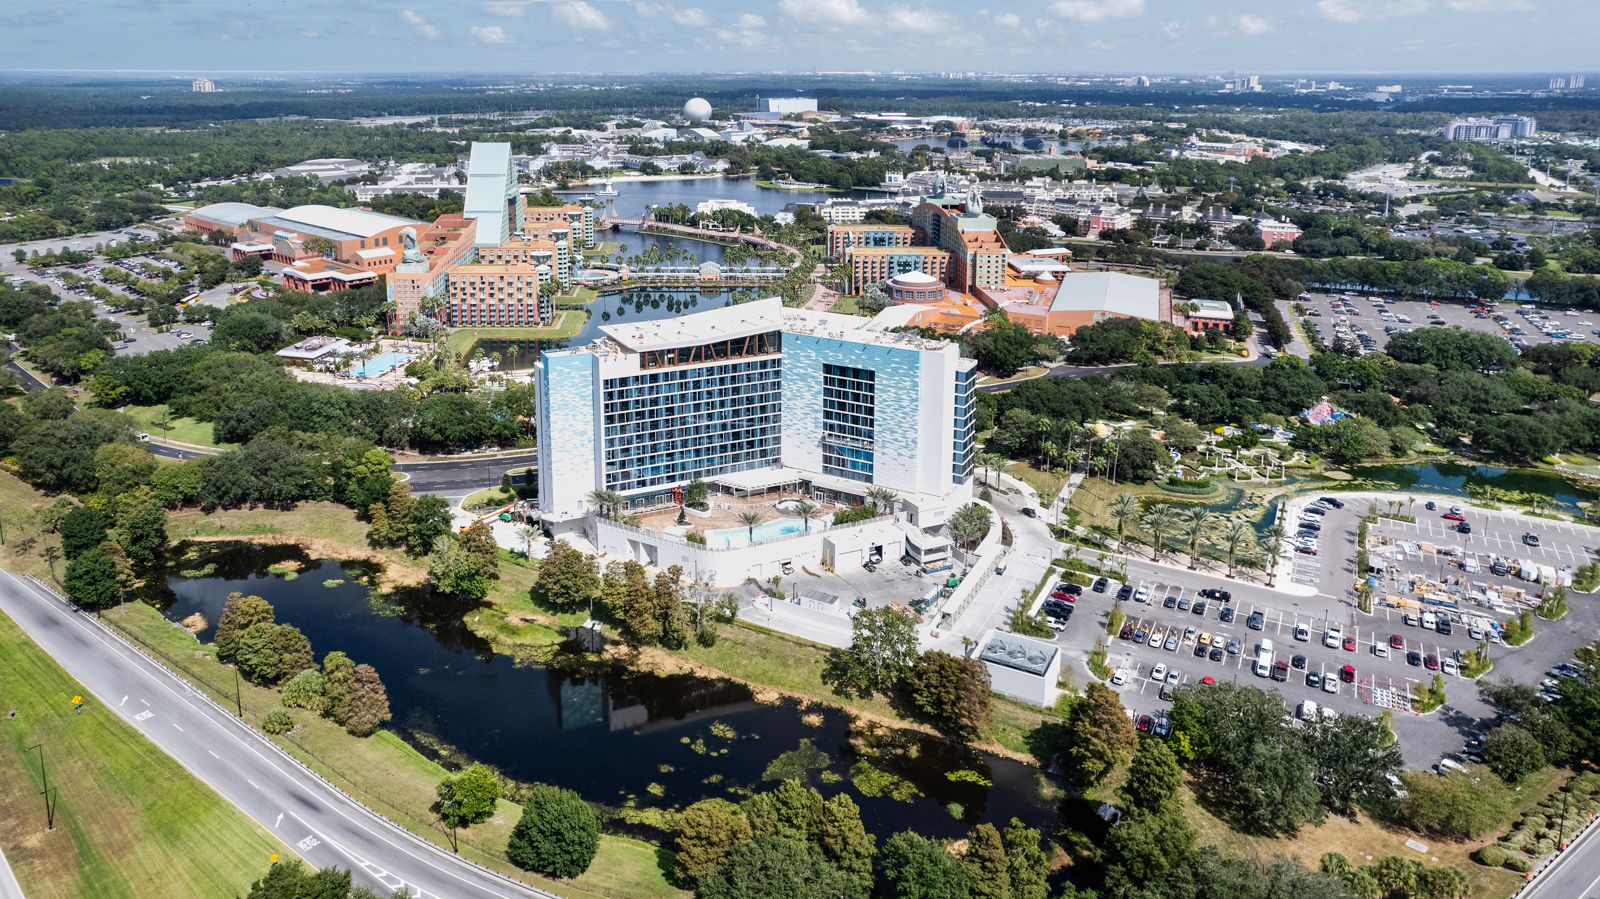 An aerial view of a hotel in Orlando, Florida among past projects.